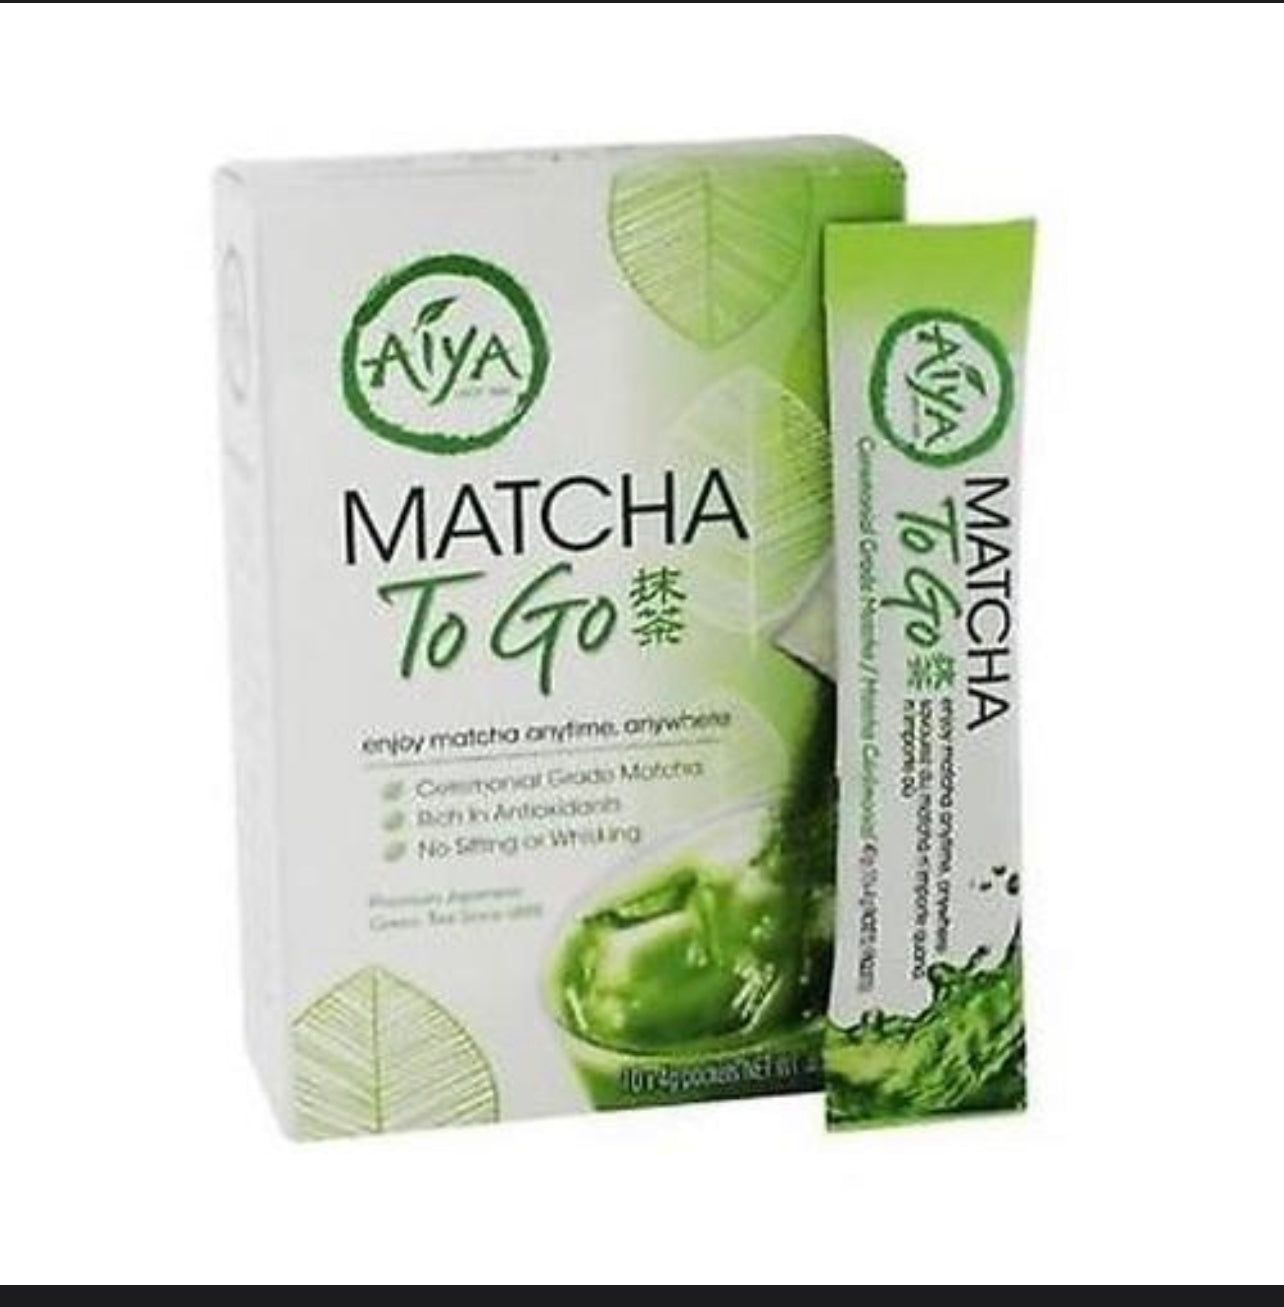 ✅ Aiya Matcha to Go 4gm Packets, 10 Count